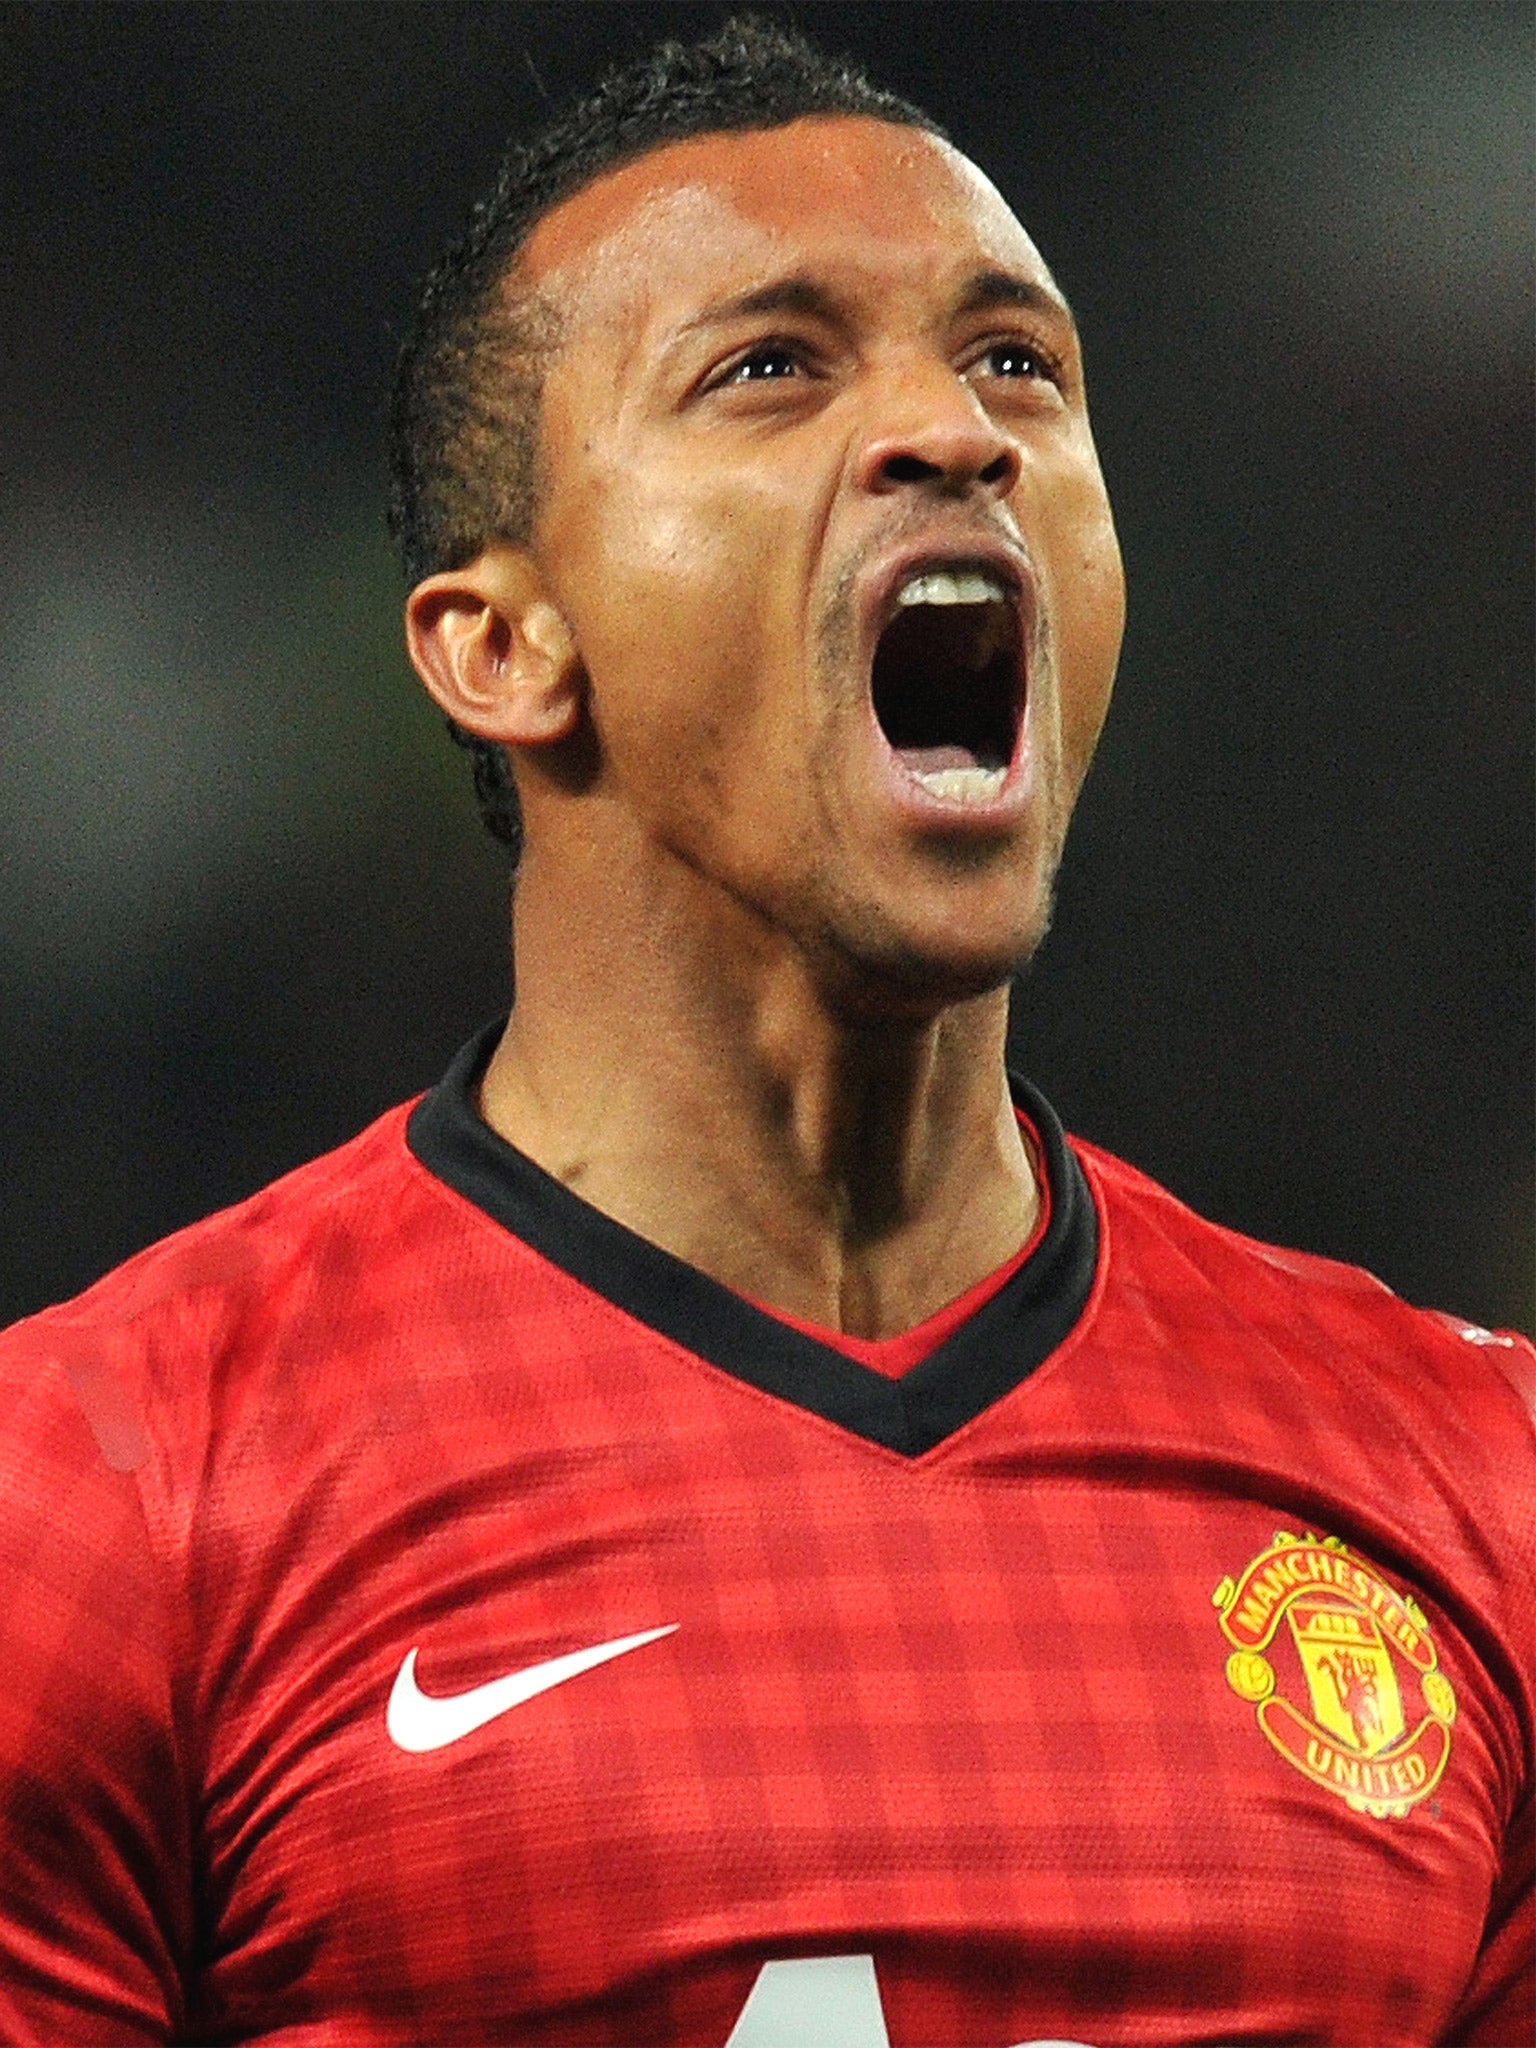 Nani has been offered a new contract but is likely to leave this summer